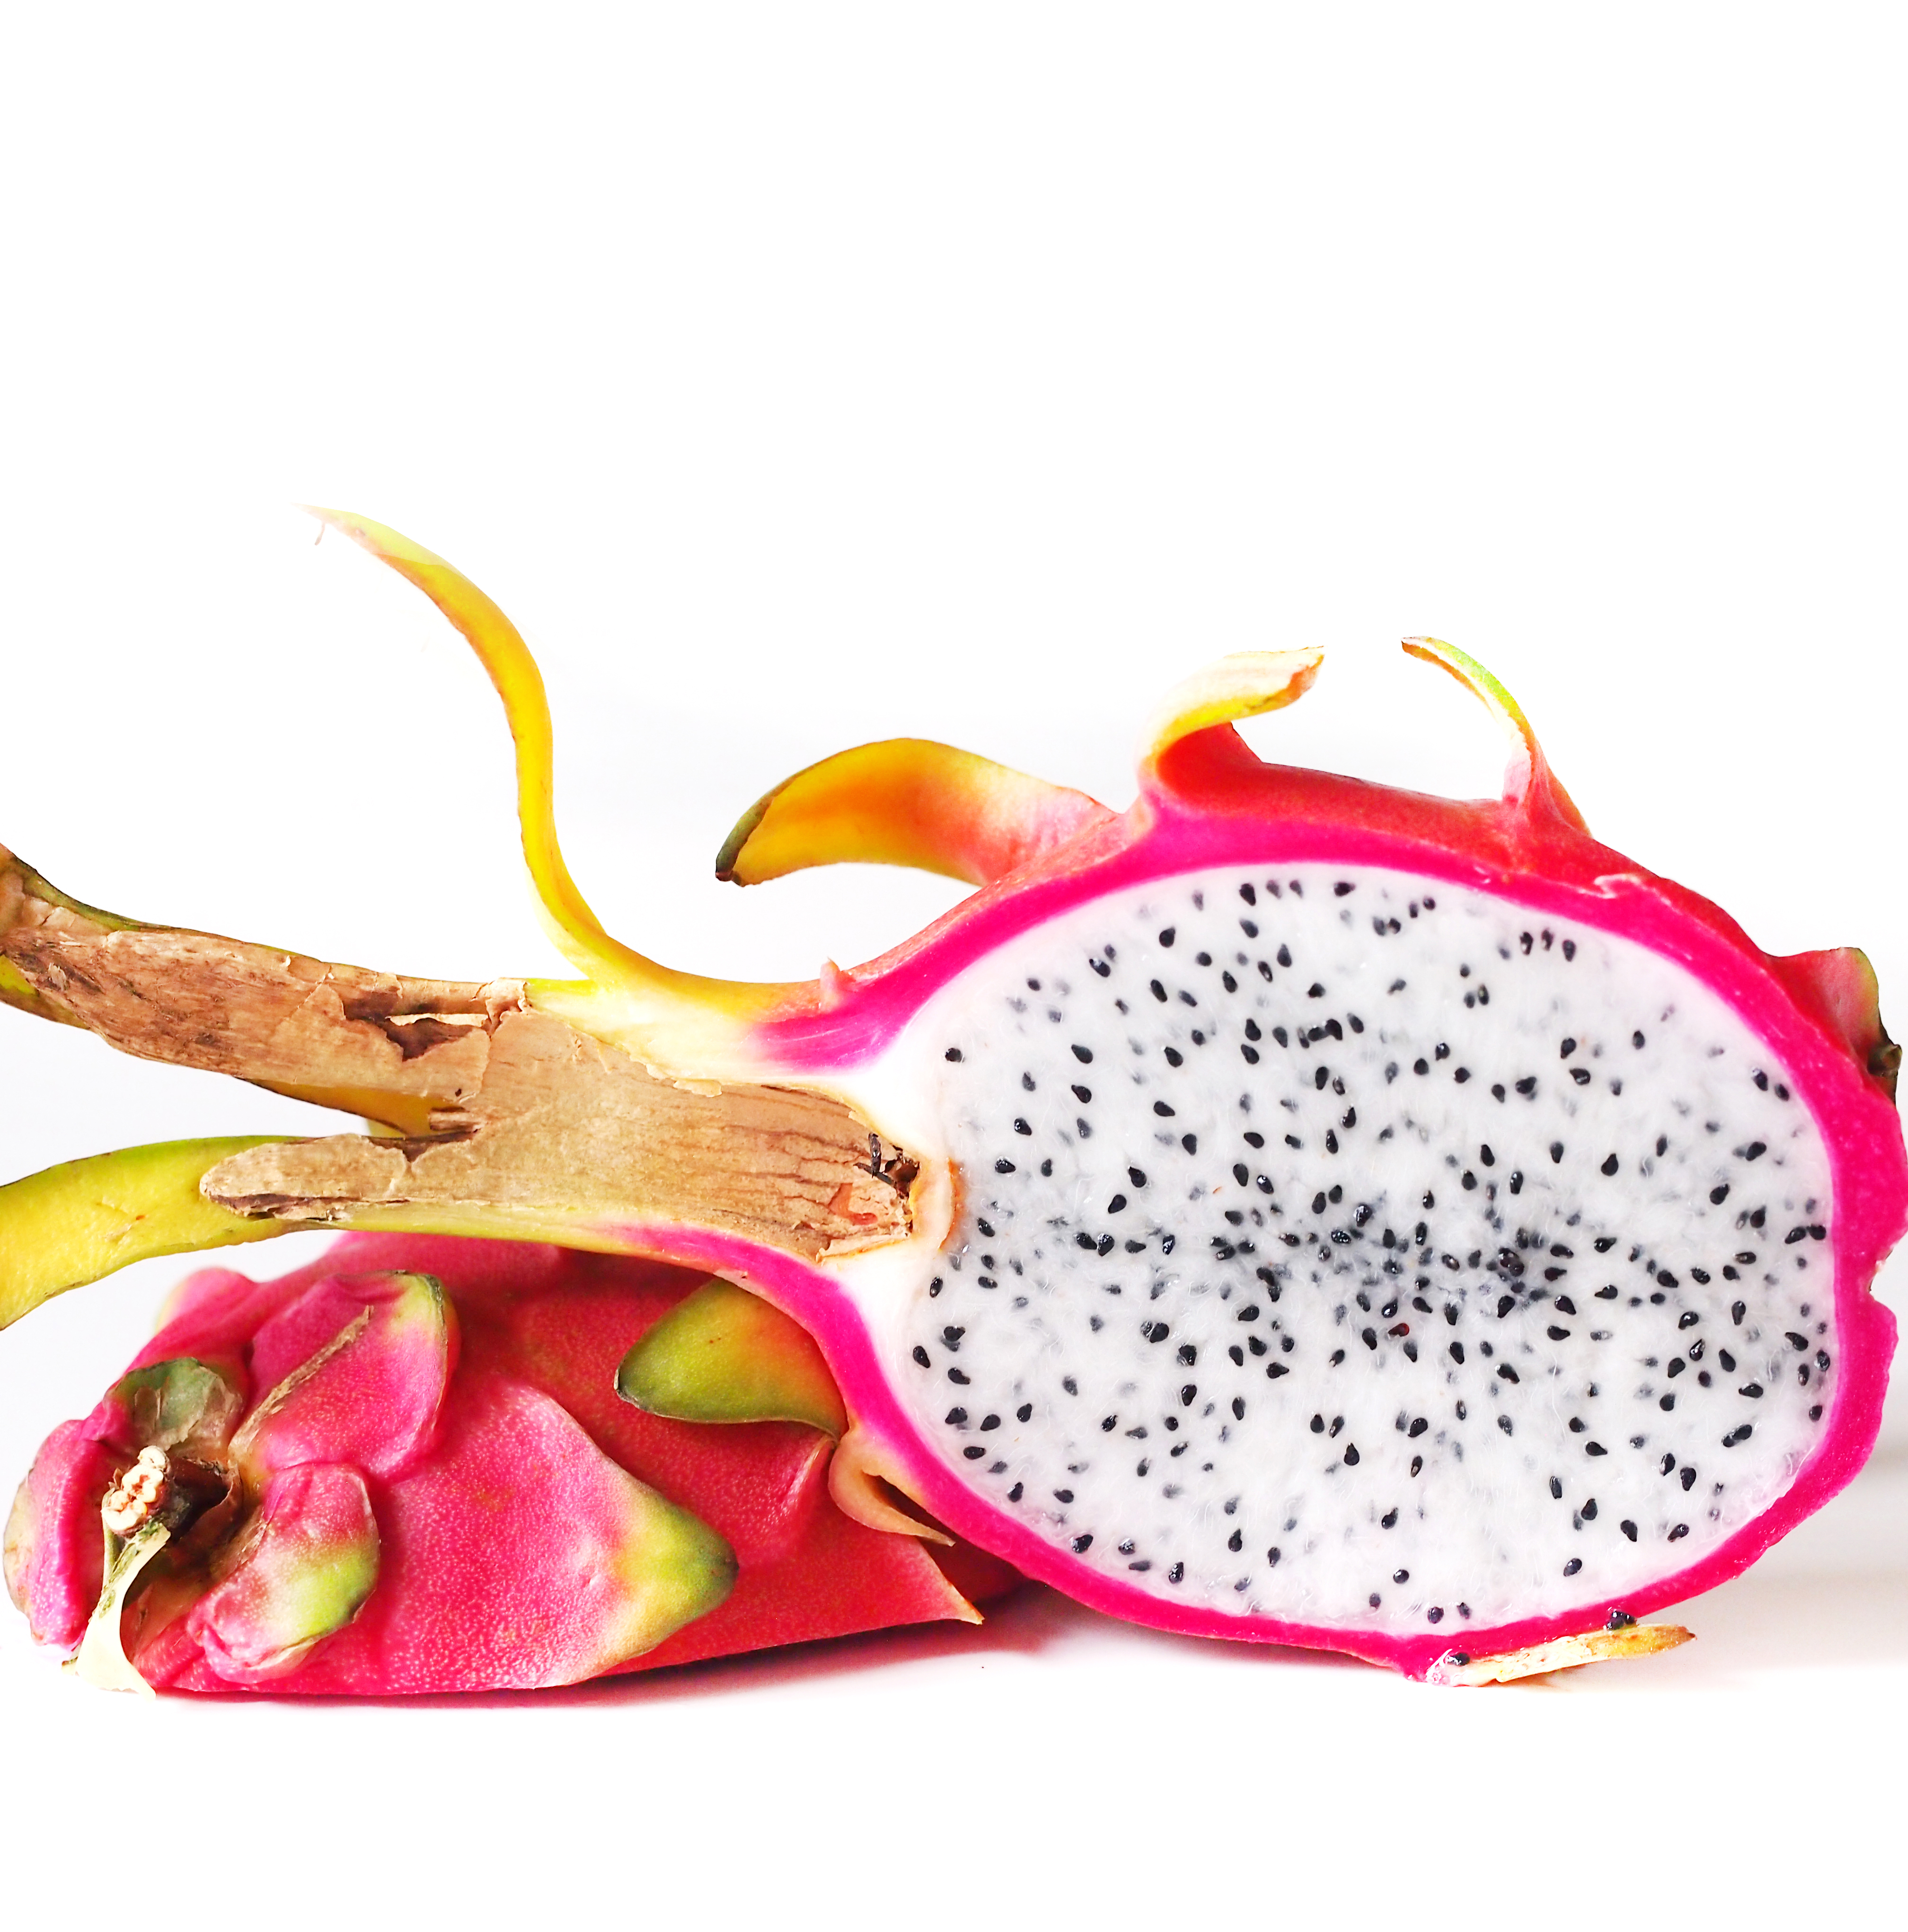 Yellow Dragon Fruit: Can It Help You Poop?